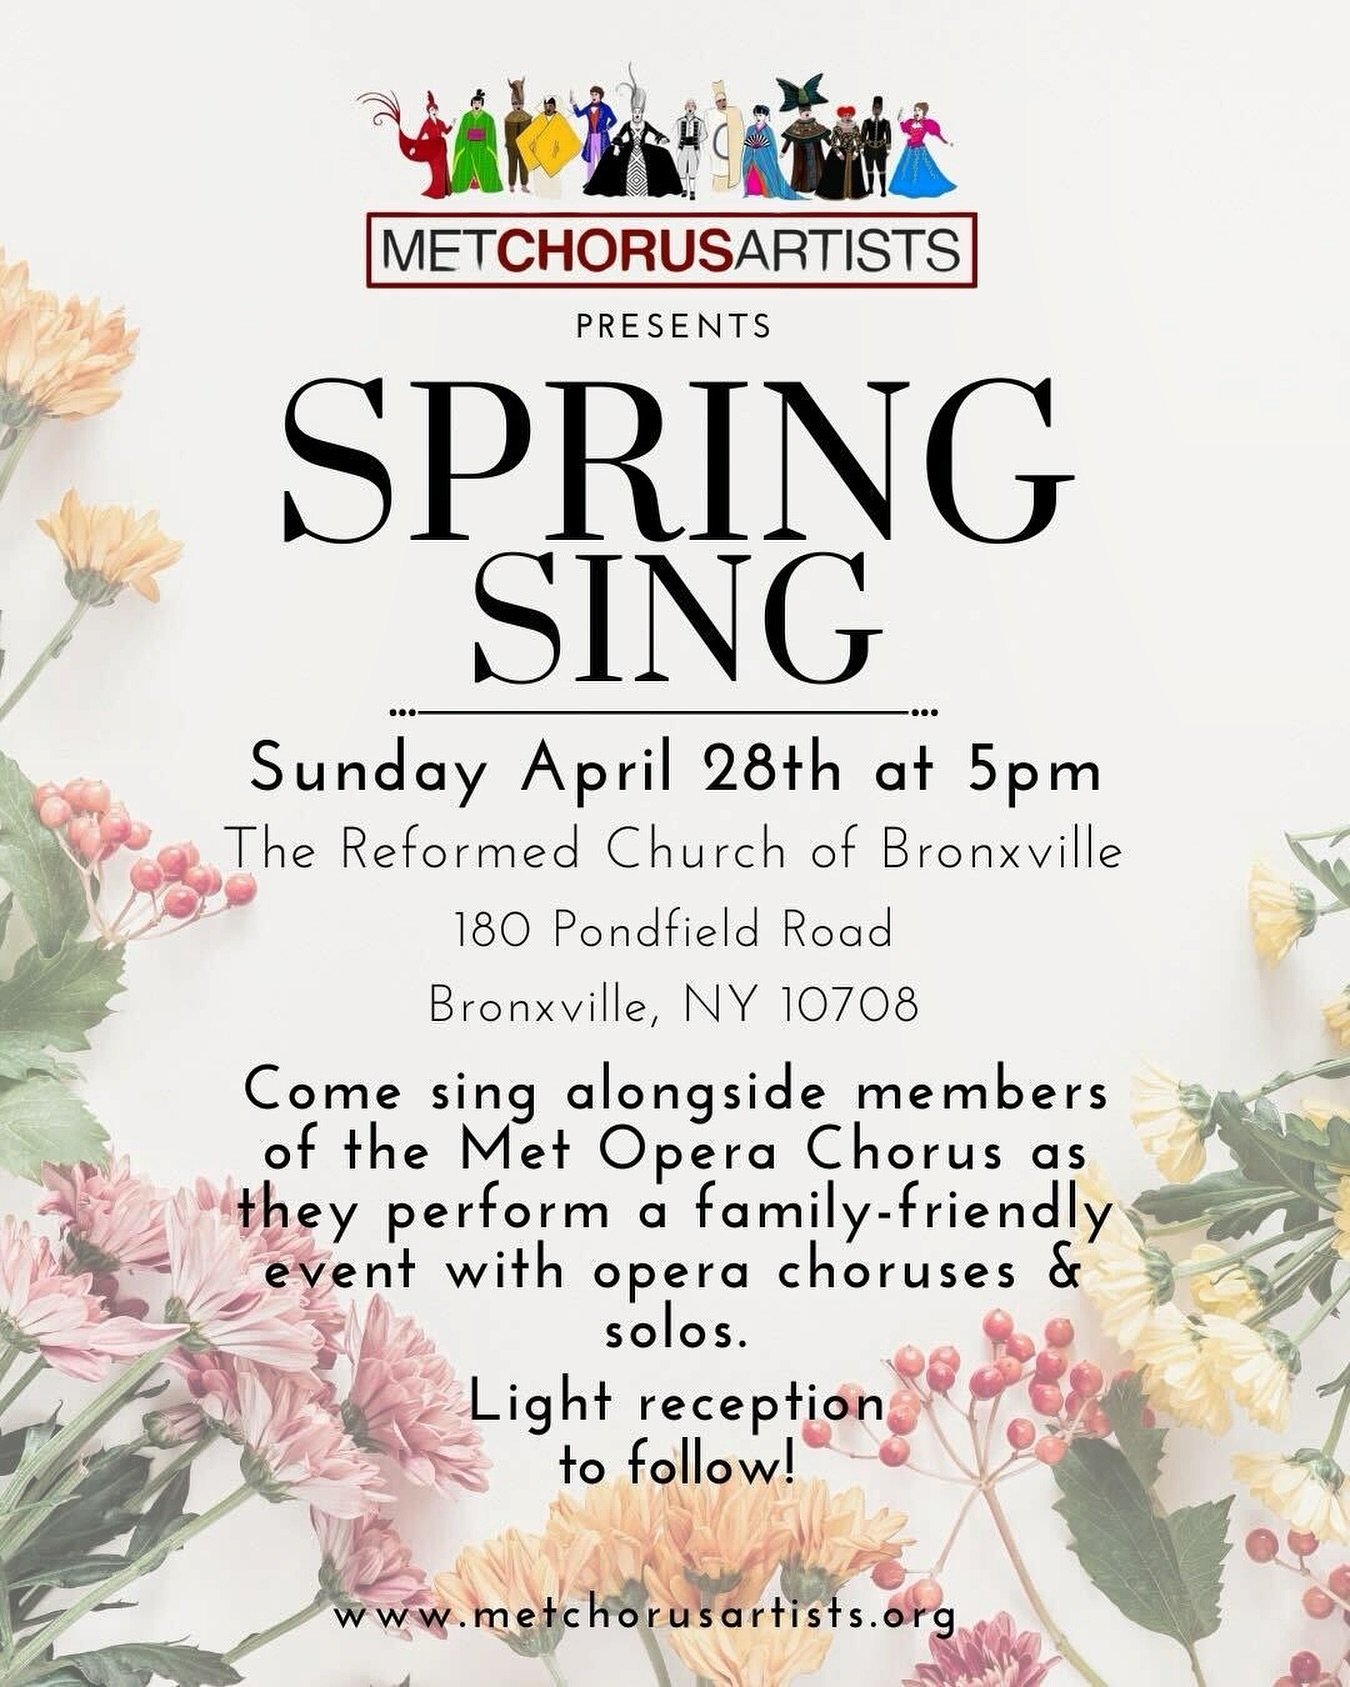 We wanted to invite you all to our Spring Sing event this coming Sunday at 5pm. This event features 14 amazing singers from the Regular and Extra Chorus of the Metropolitan Opera Chorus and will take place at the Reformed Church of Bronxville, locate